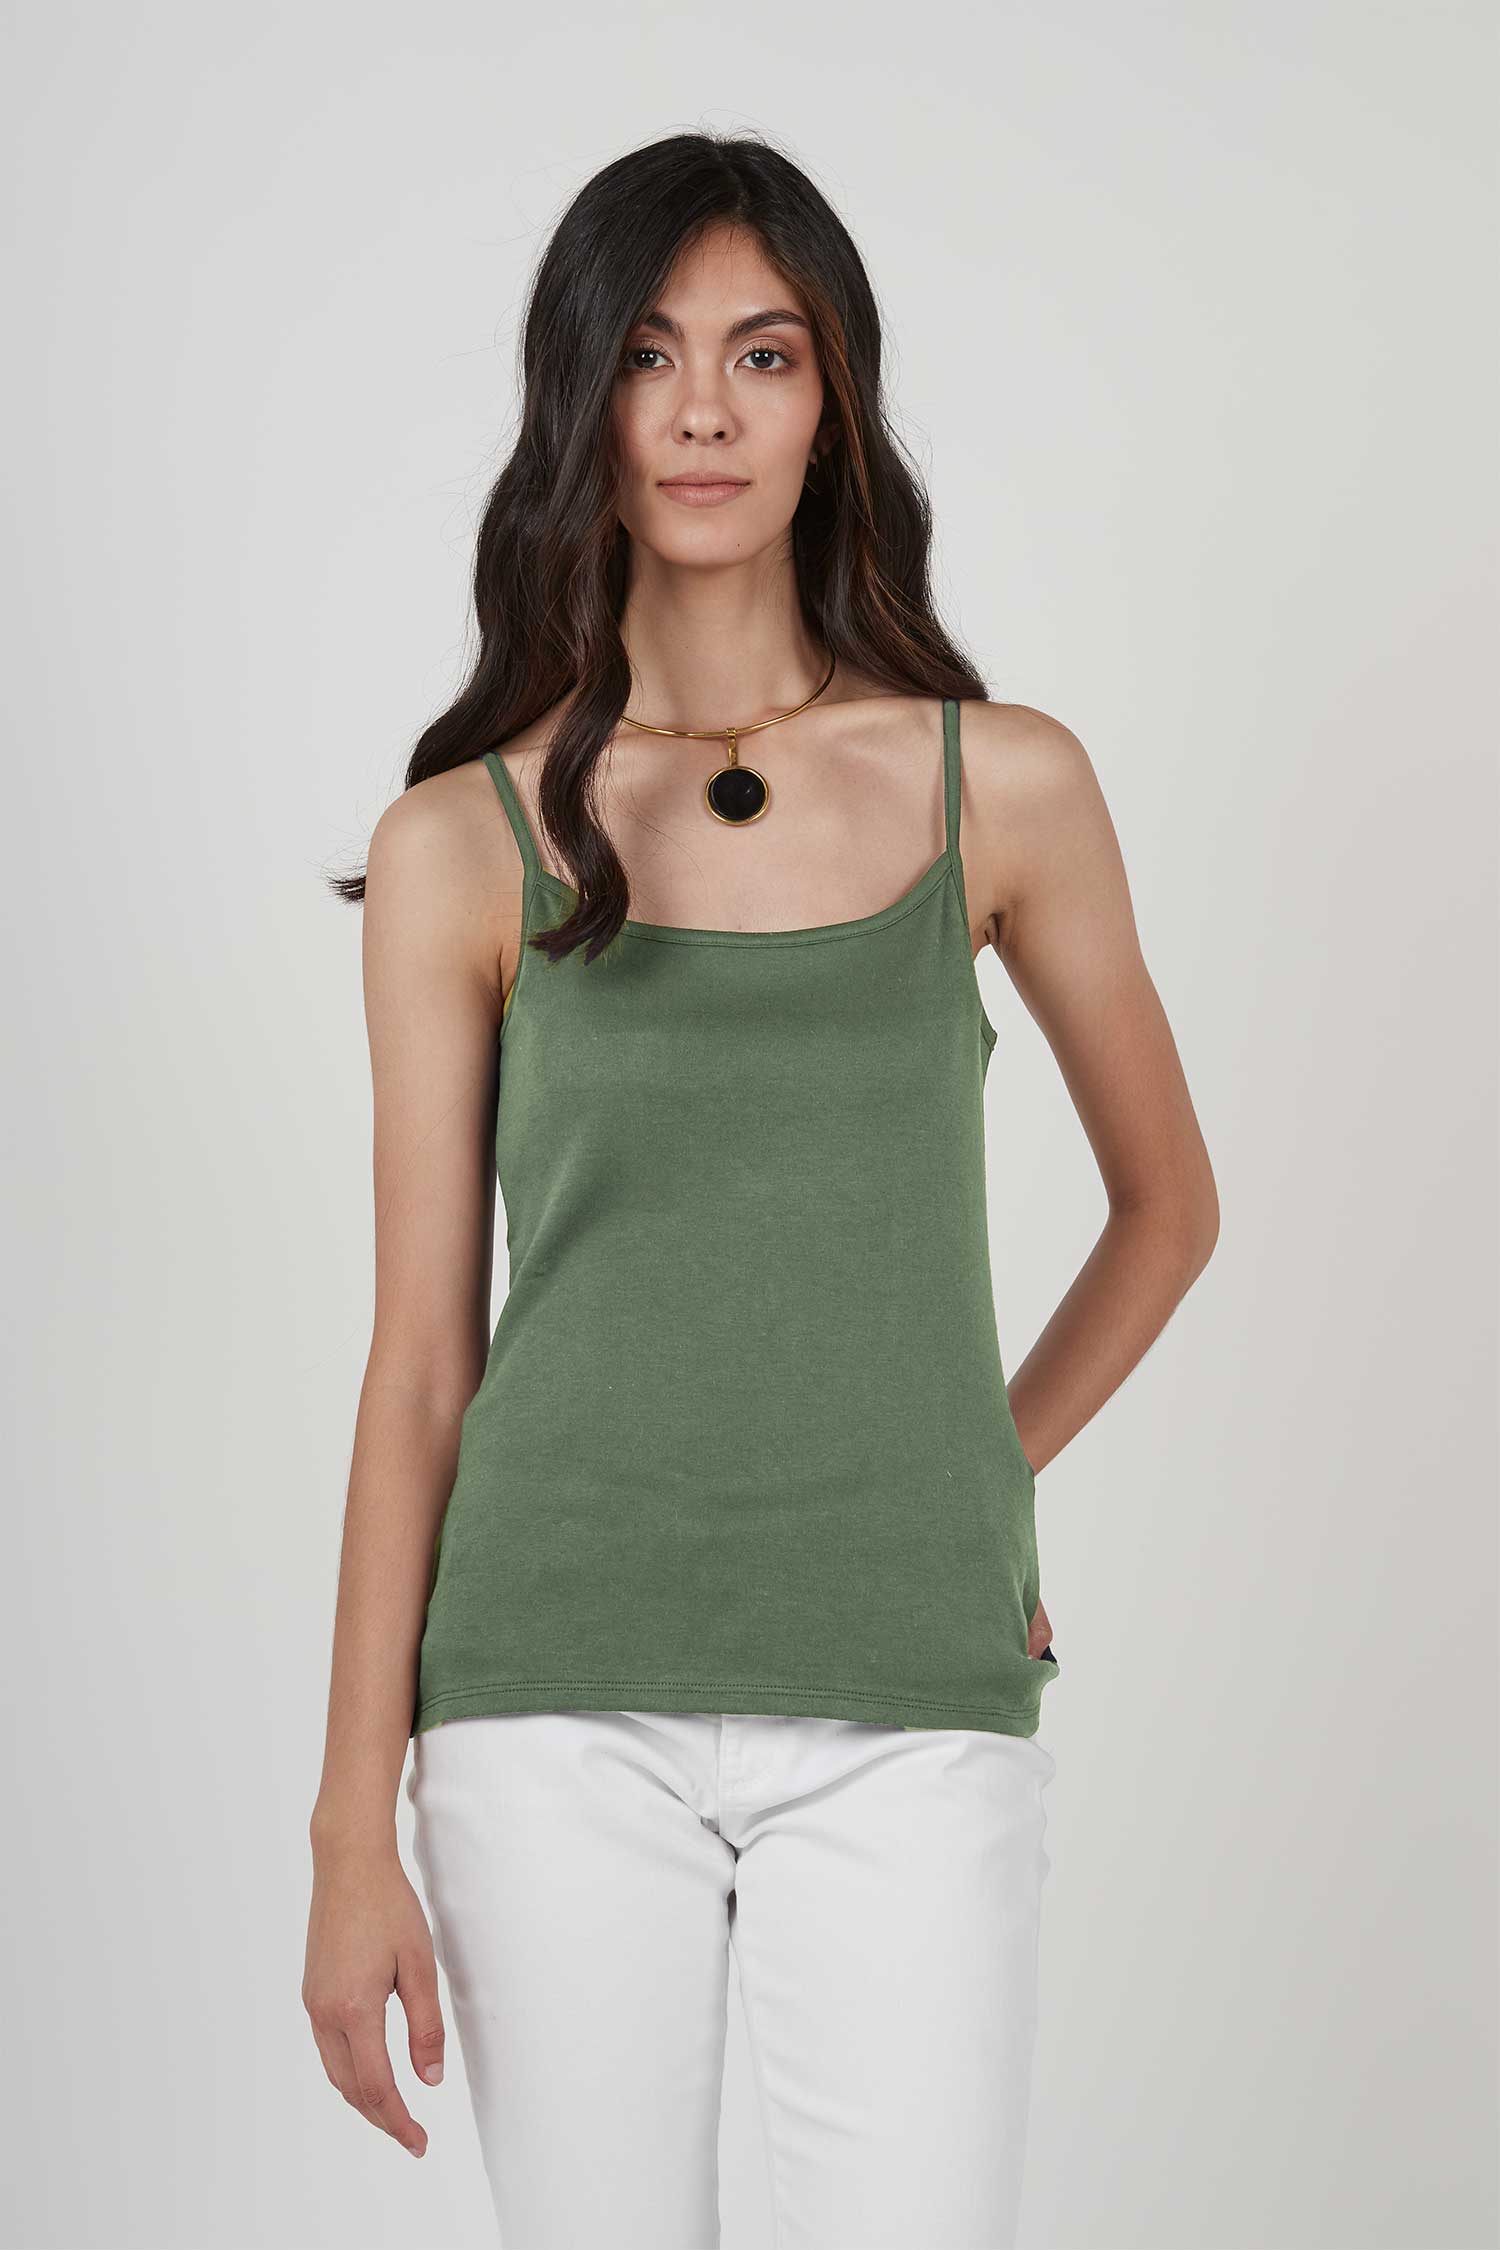 12 Best Organic Cotton Camisoles You'll Love